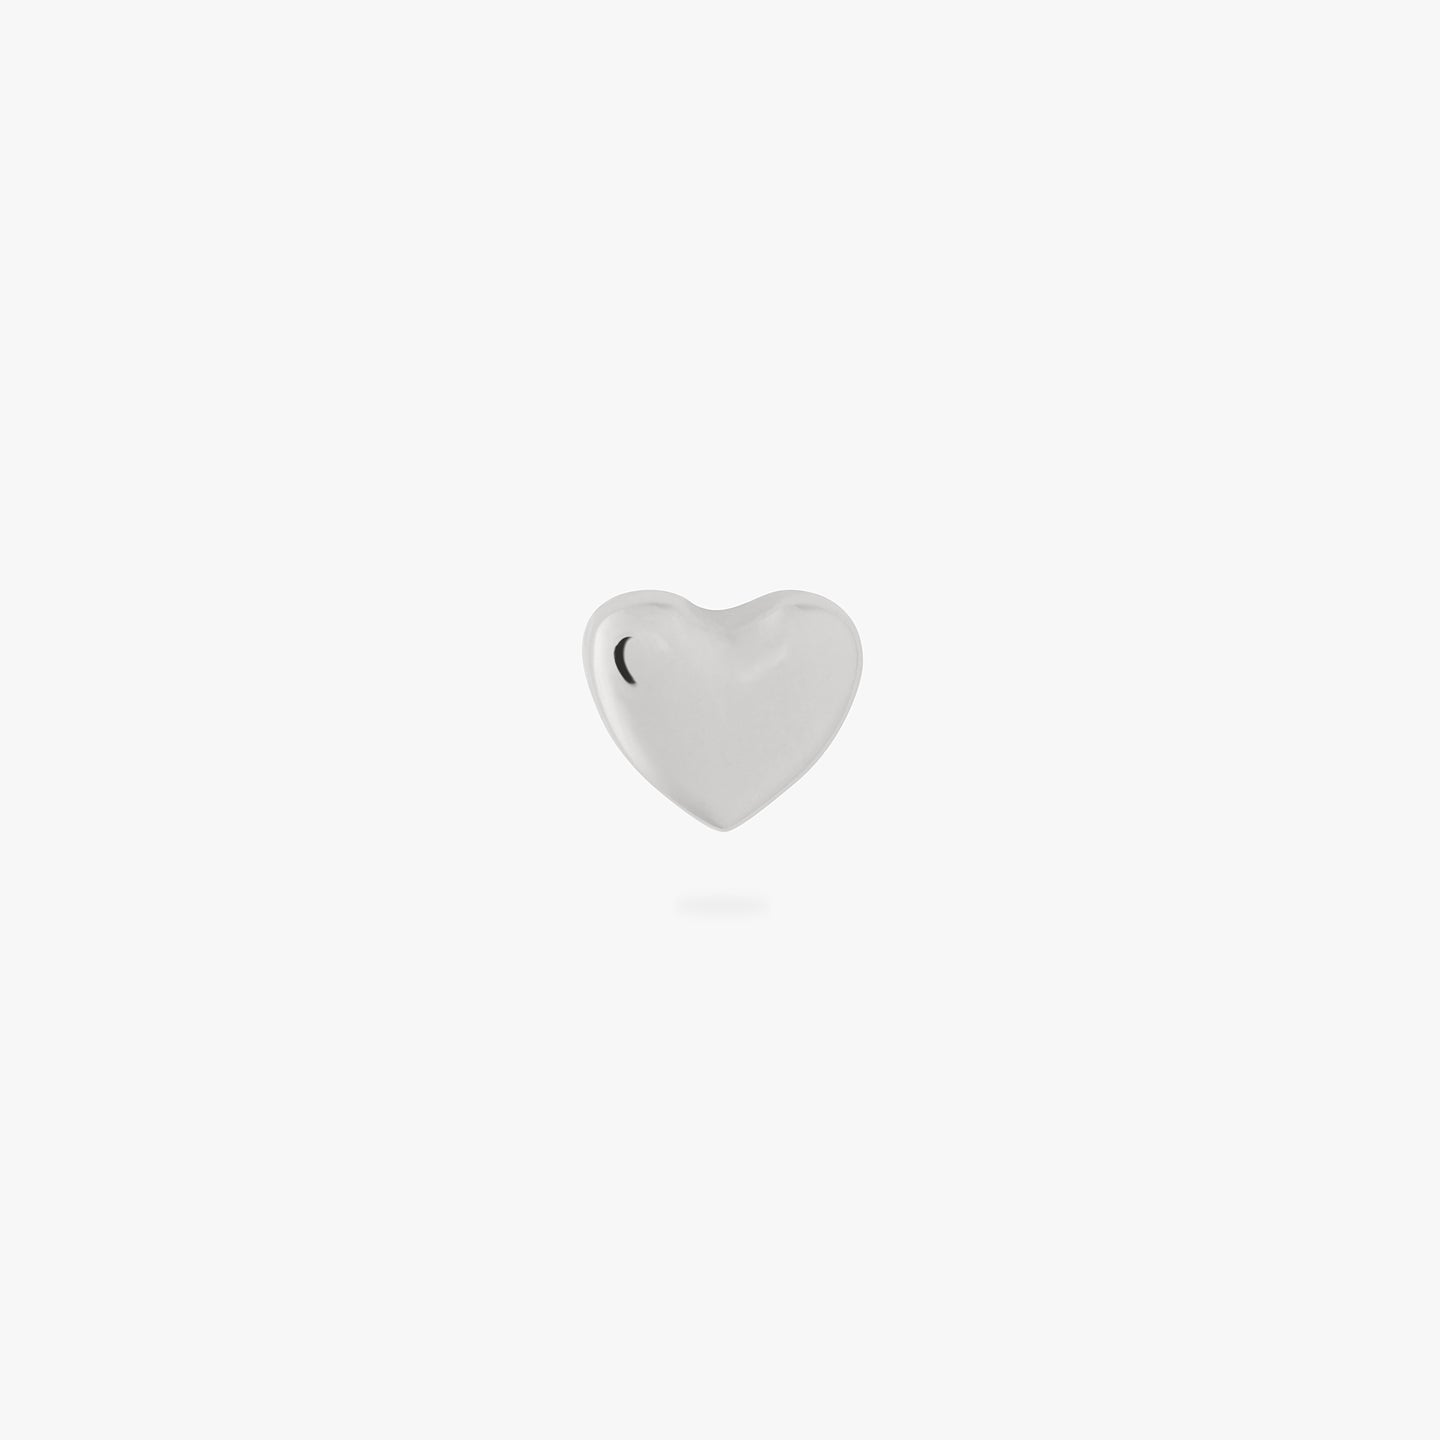 An image of a silver heart shaped flatback post that is 6mm in length. color:null|6mm length